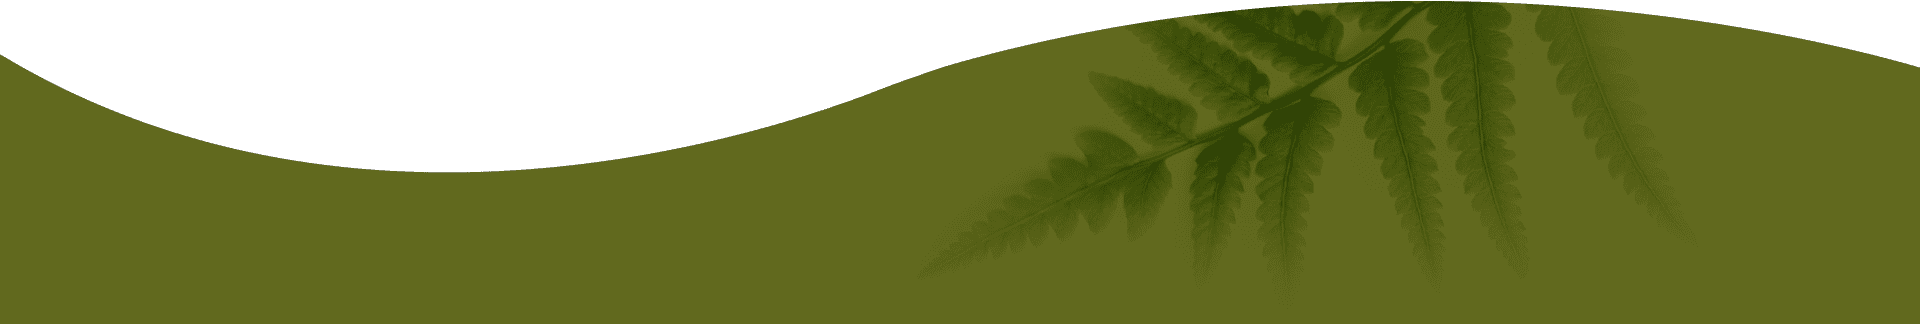 A green background with a fern on it.